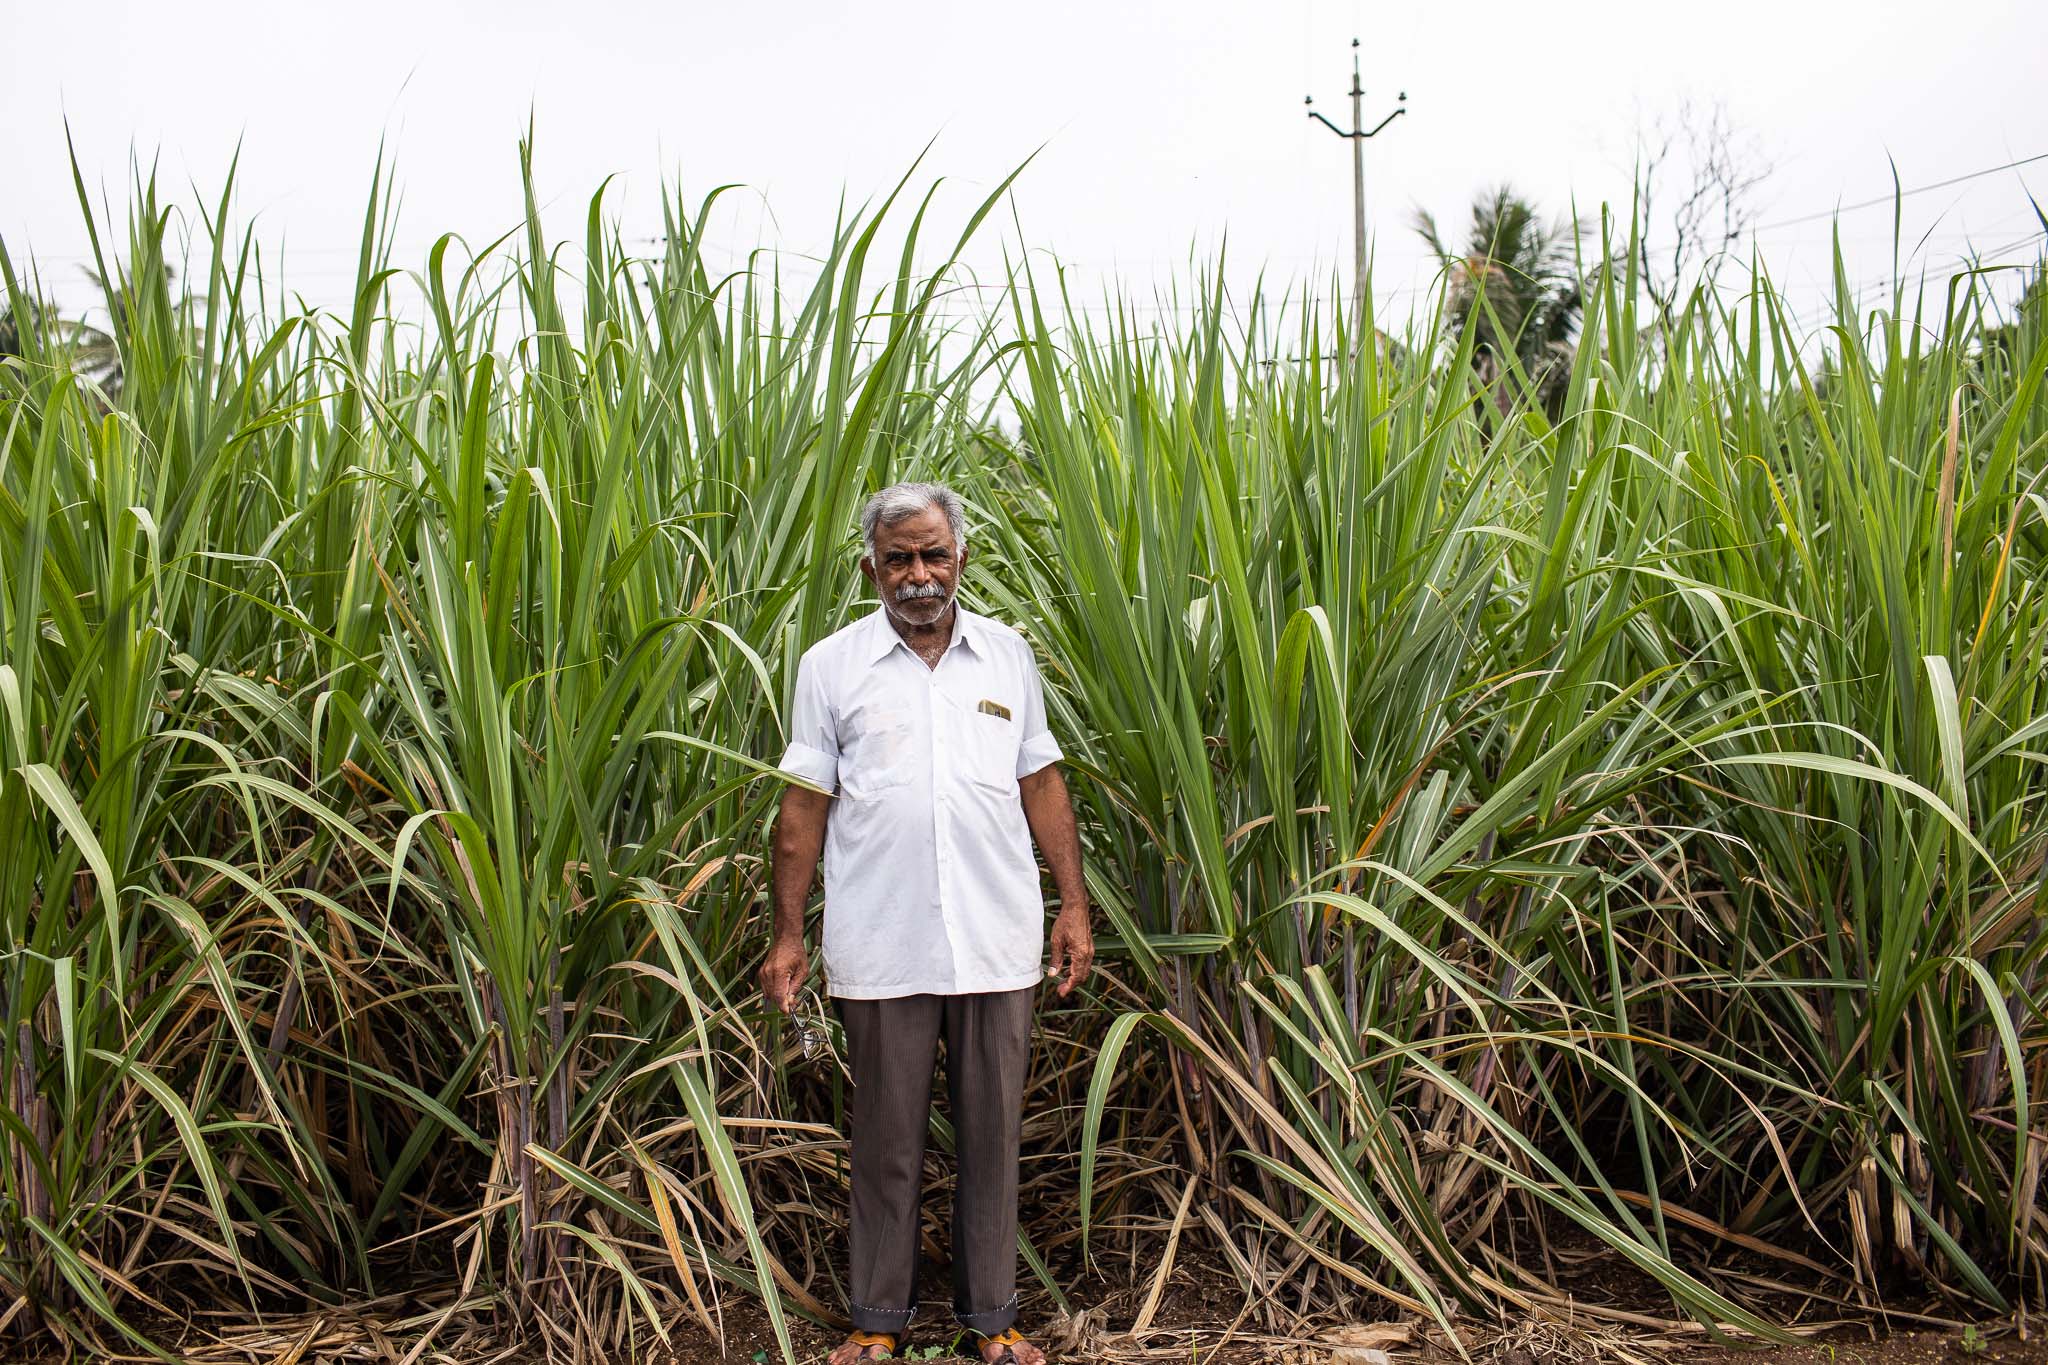 A man stands in a field of sugarcane, the stalks of sugarcane behind him rising above his head.